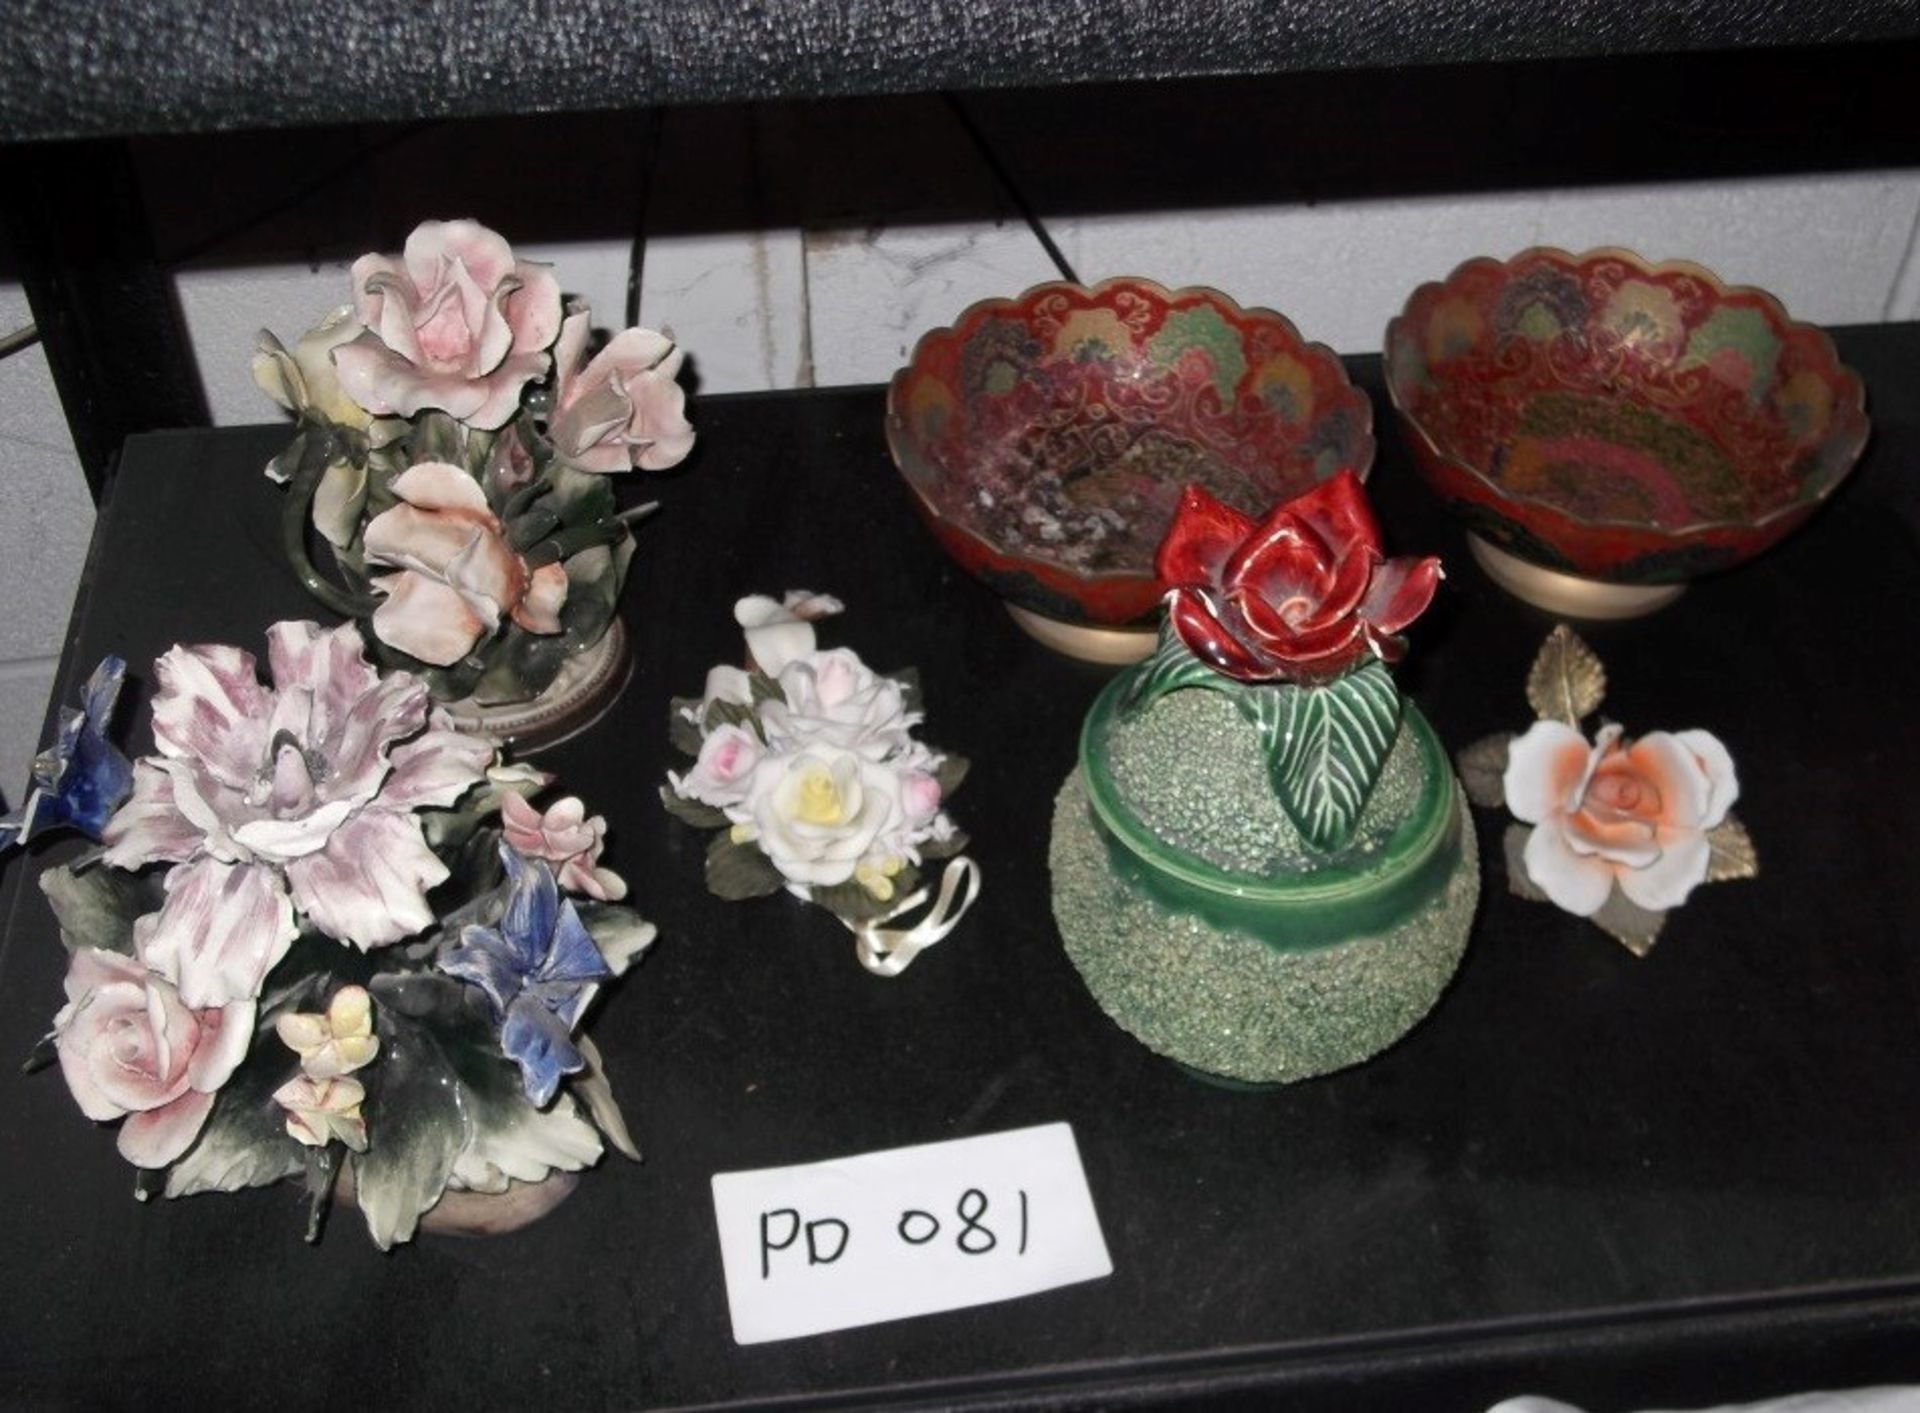 37 x Assorted Decorative Items - Ceramics / Ornaments / Figurines - Pre-Loved, Mostly Of American - Image 3 of 8